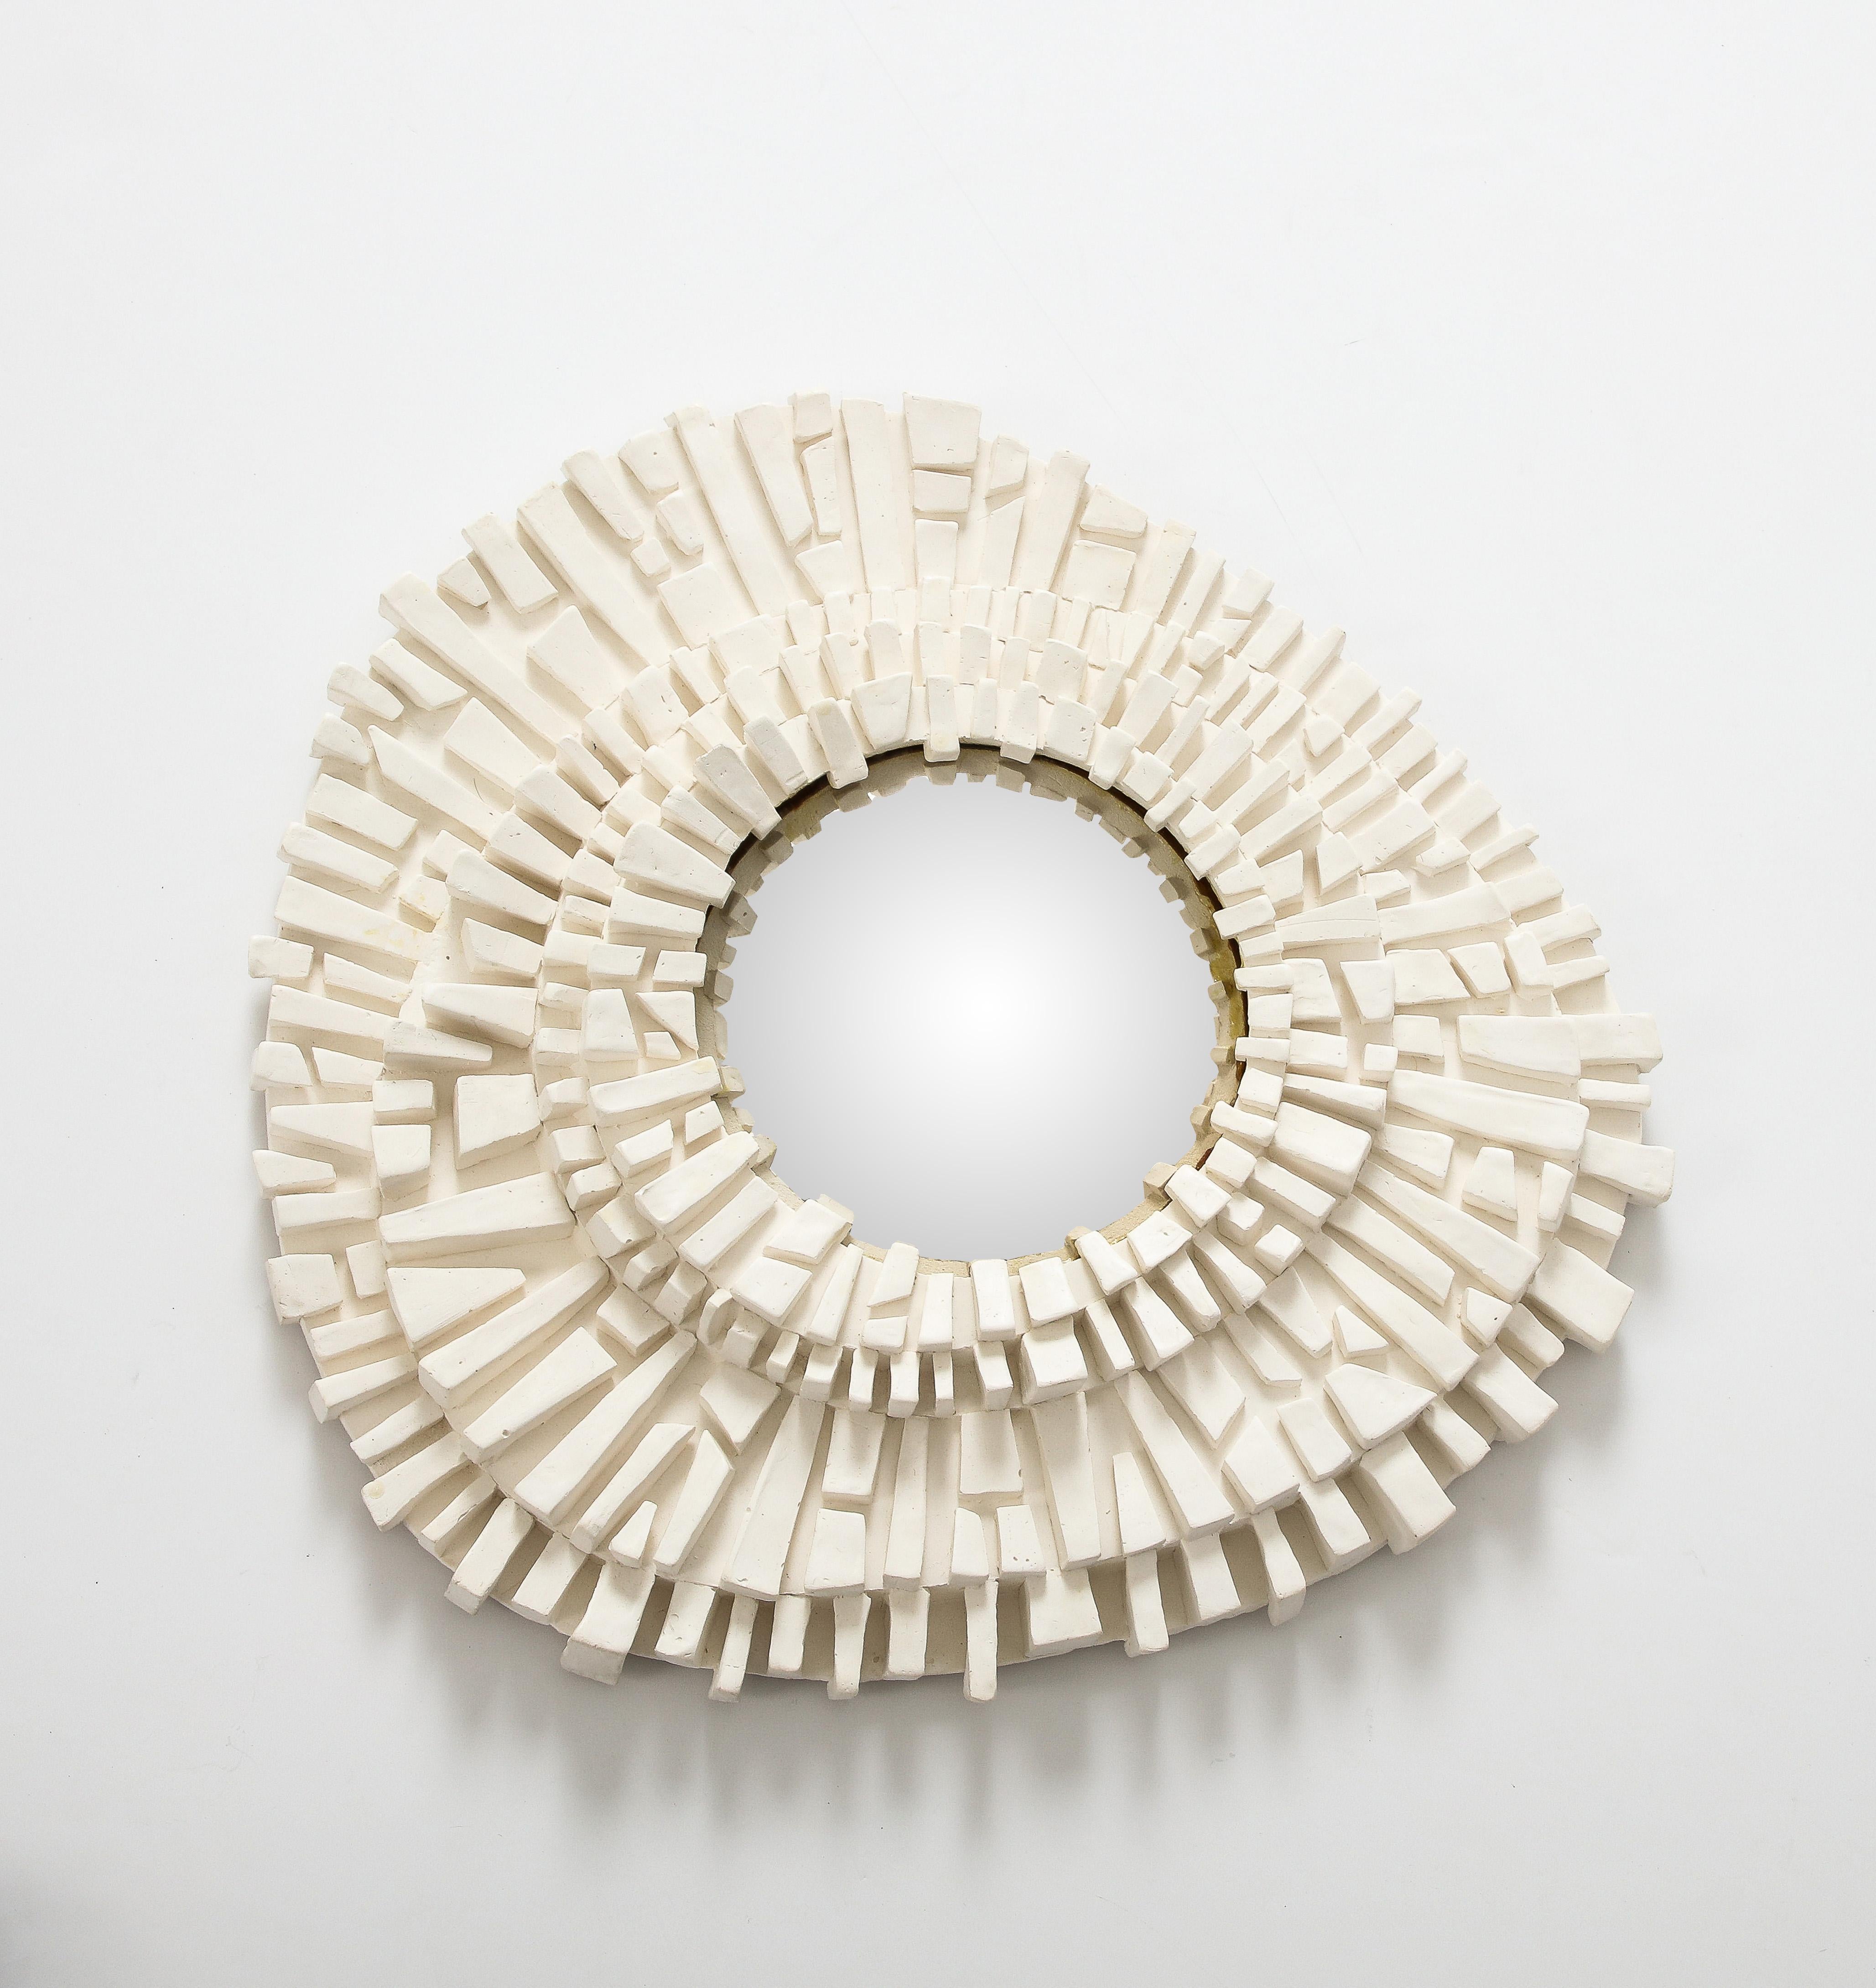 One of a series in our inventory, this carved plaster mirror with convex glass is stunning on its own or as part of a collection Its asymmetrical shape and interesting texture make it a unique piece, suitable for a traditional or contemporary